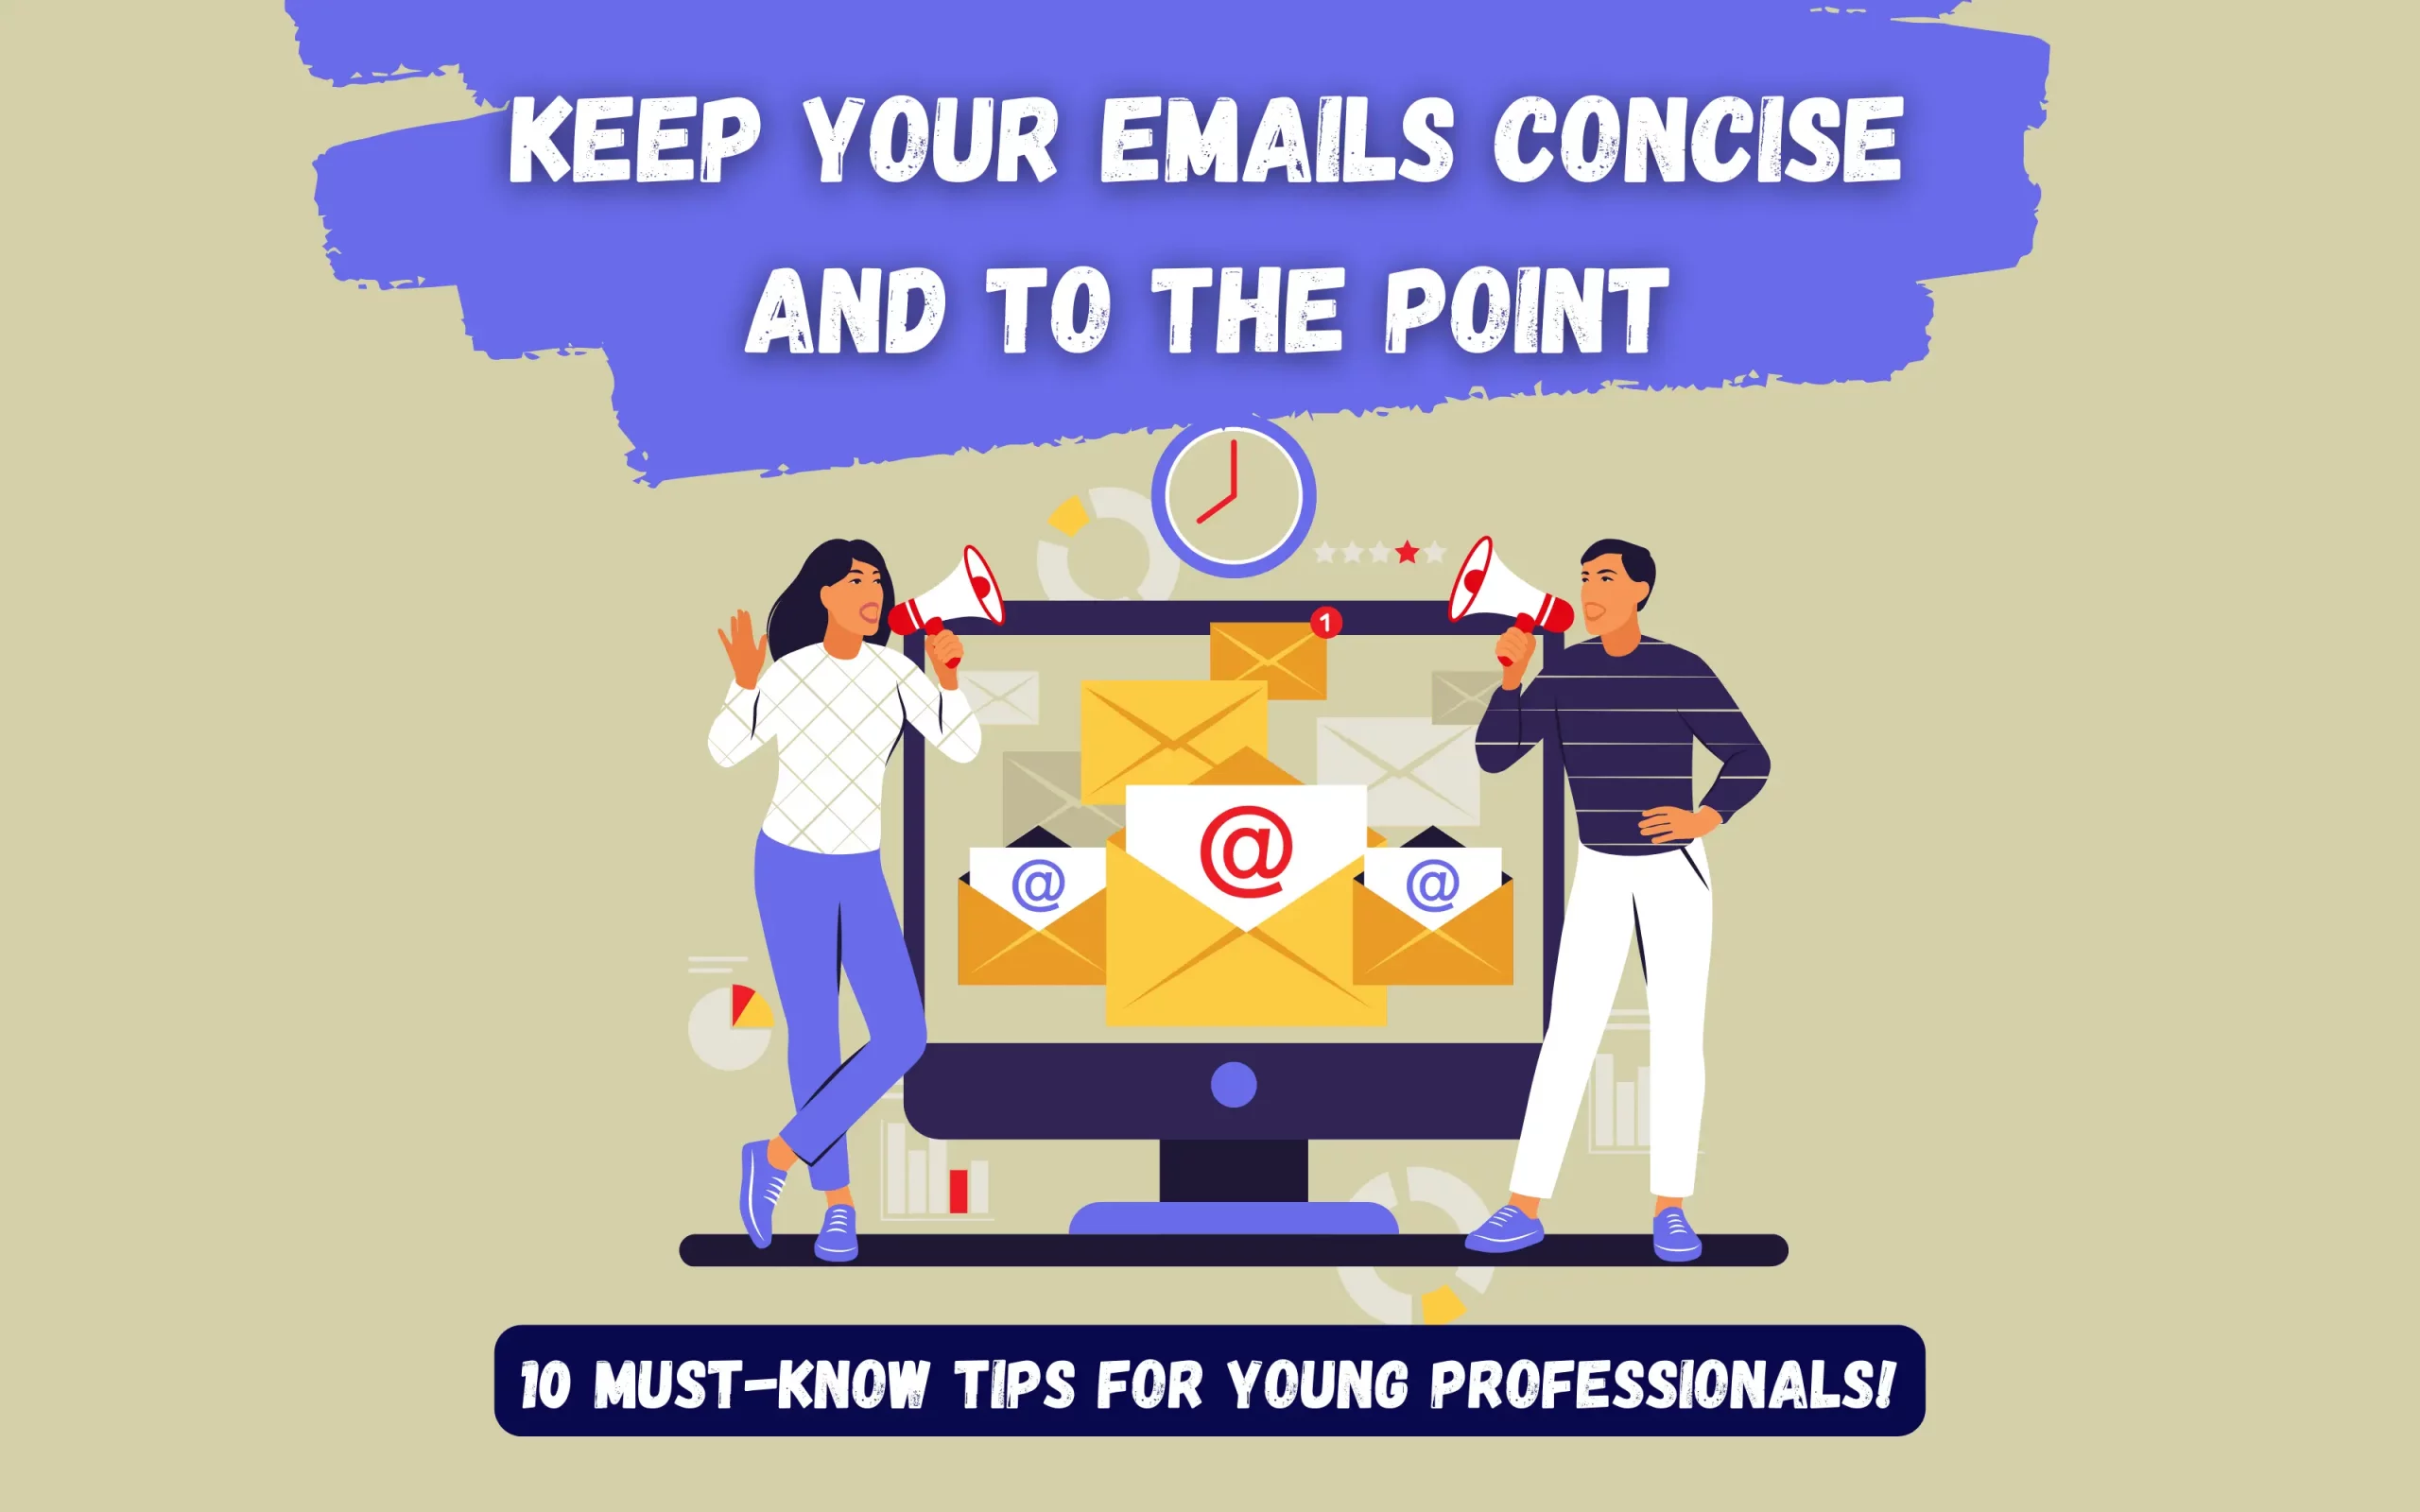 How To Keep Your Emails Concise and to the Point | 3 Essential Tips for All Professionals!